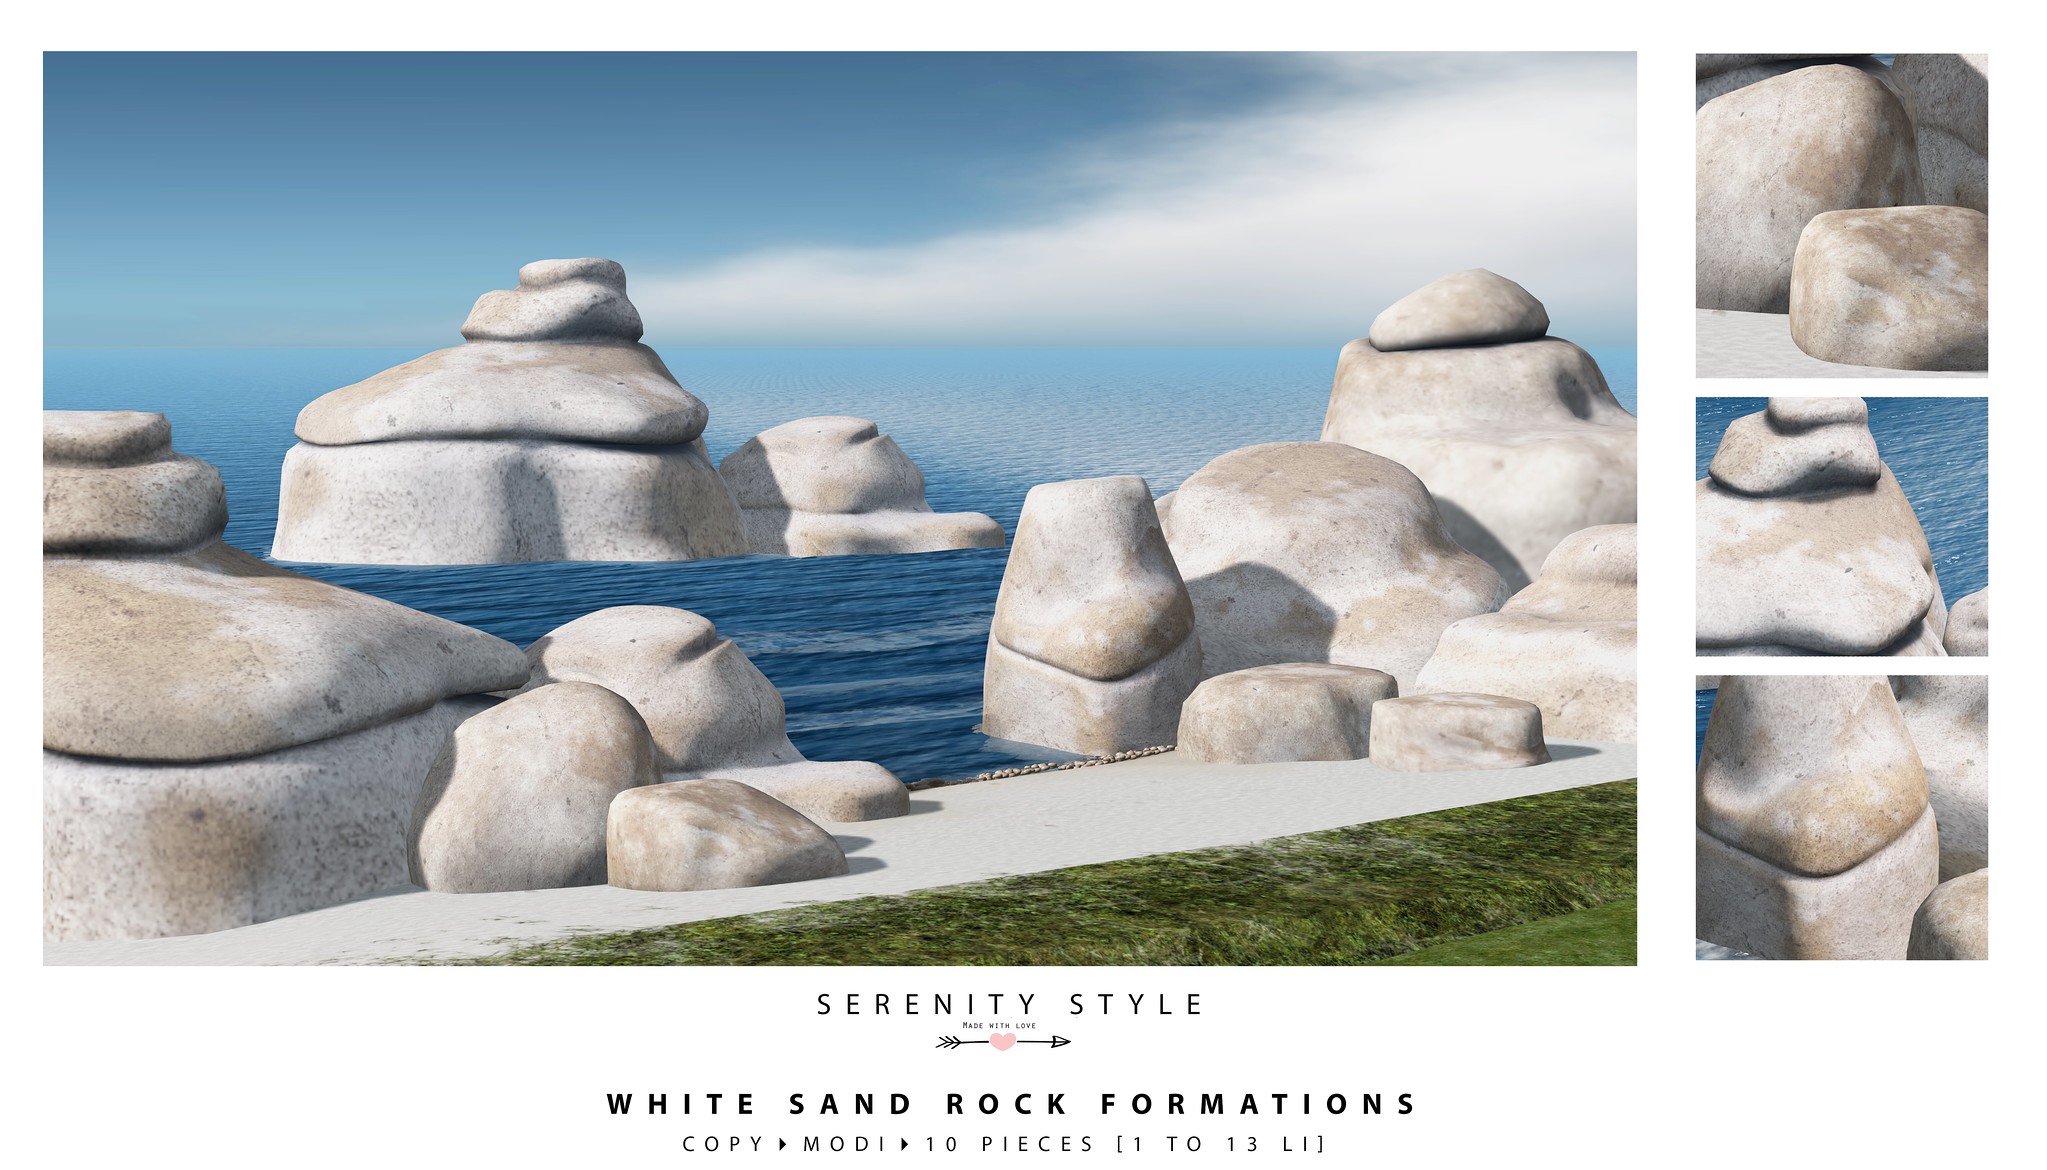 Serenity Style – White Sand Rock Formations